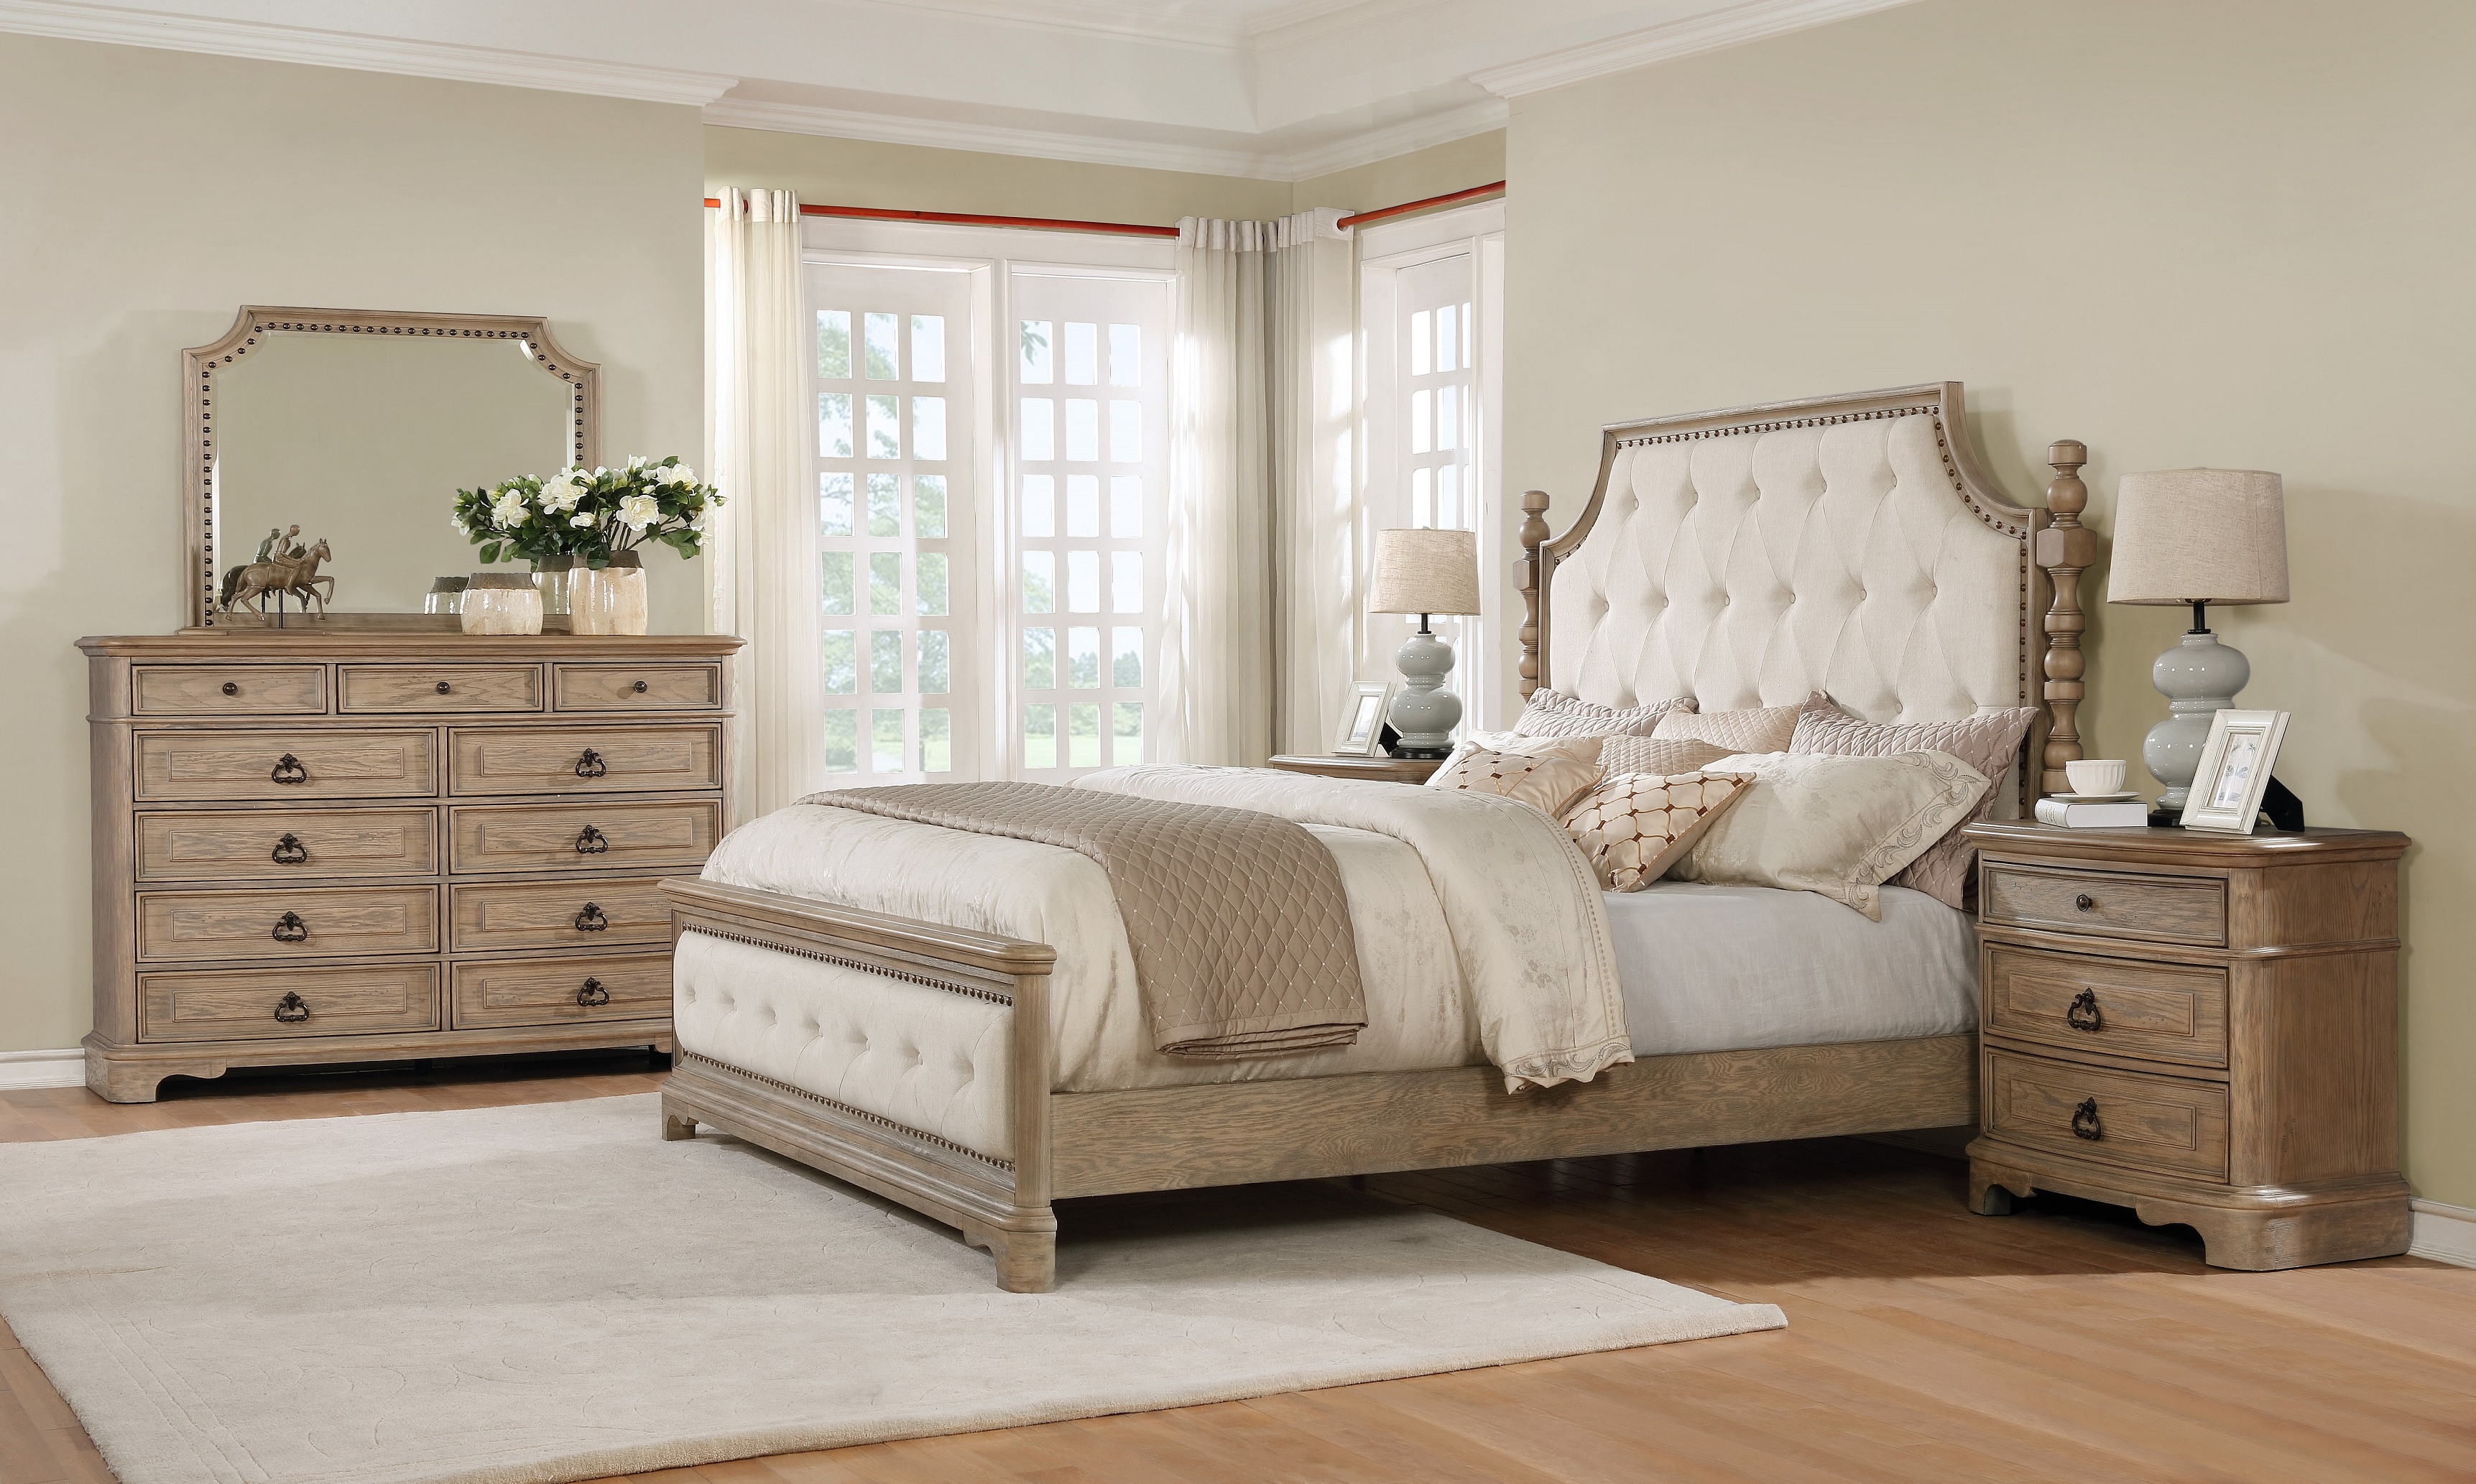 Piraeus Wood Bedroom Set with Upholstered Tufted Bed, Dresser, Mirror and 2 Nightstands, White Washed Finish, Queen Size - image 1 of 8